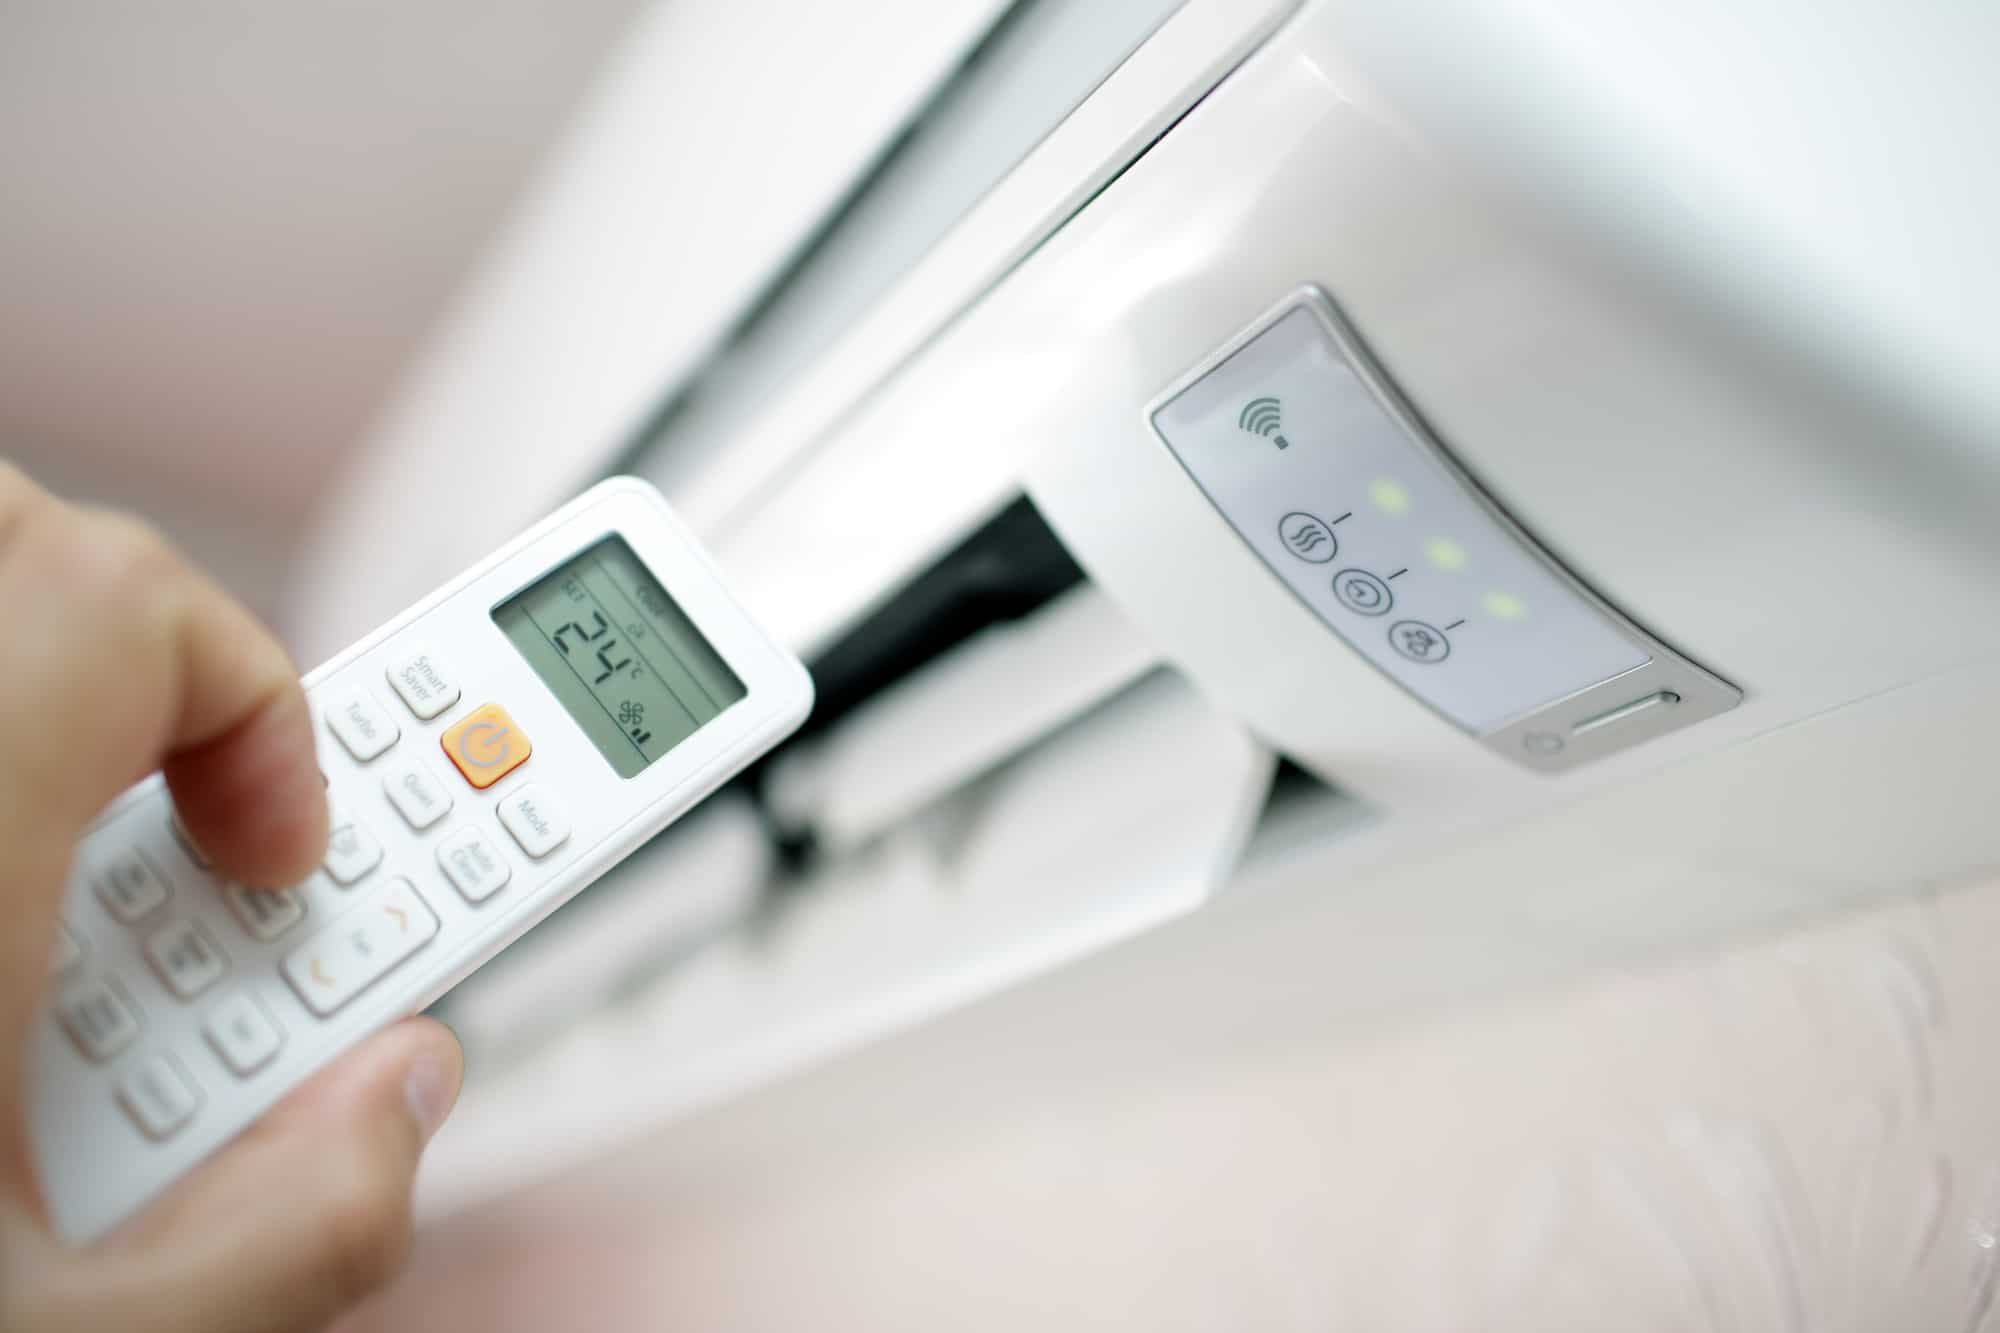 How To Fix The Error Code E7 For GE Air Conditioner